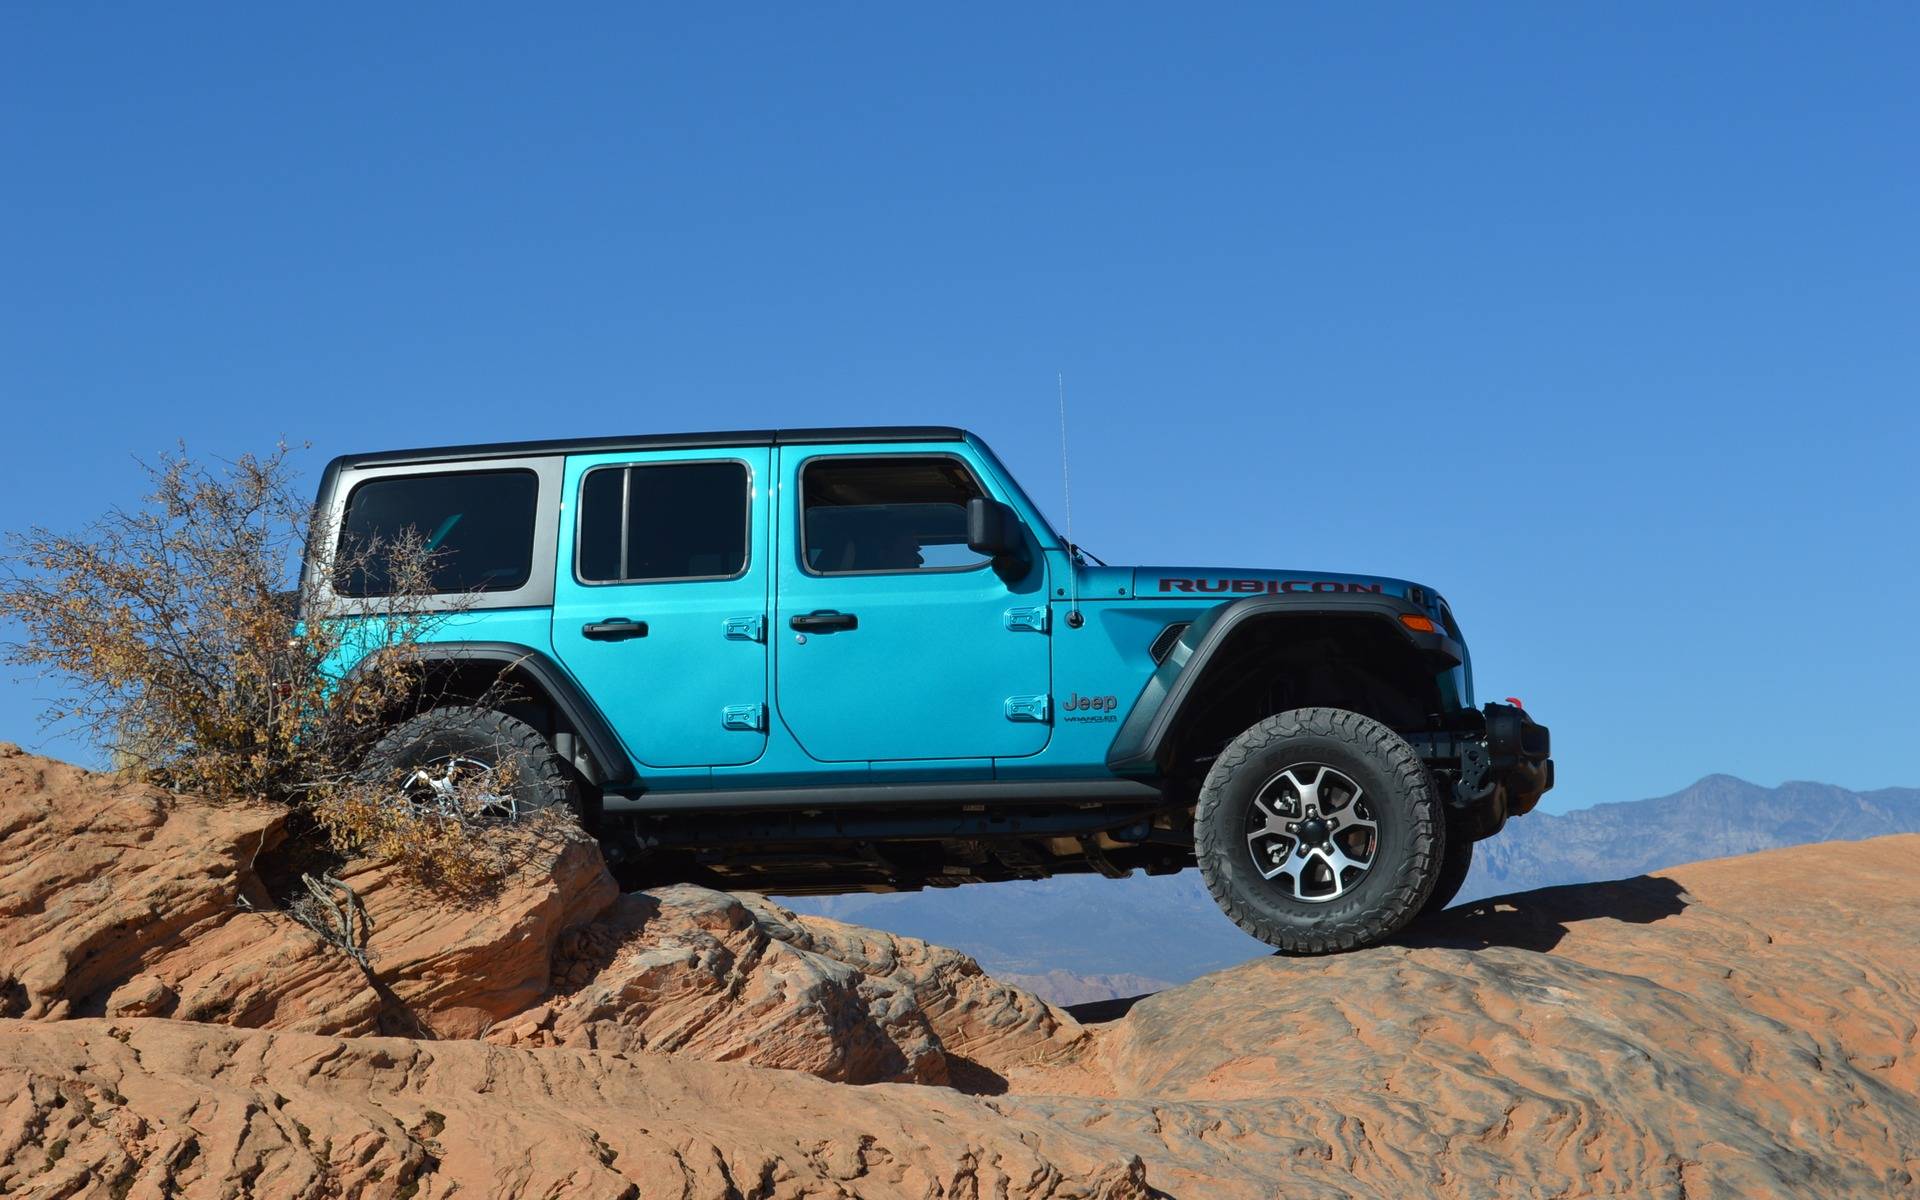 An Electric Wrangler Would Be A Better Wrangler Jeep Says The Car Guide